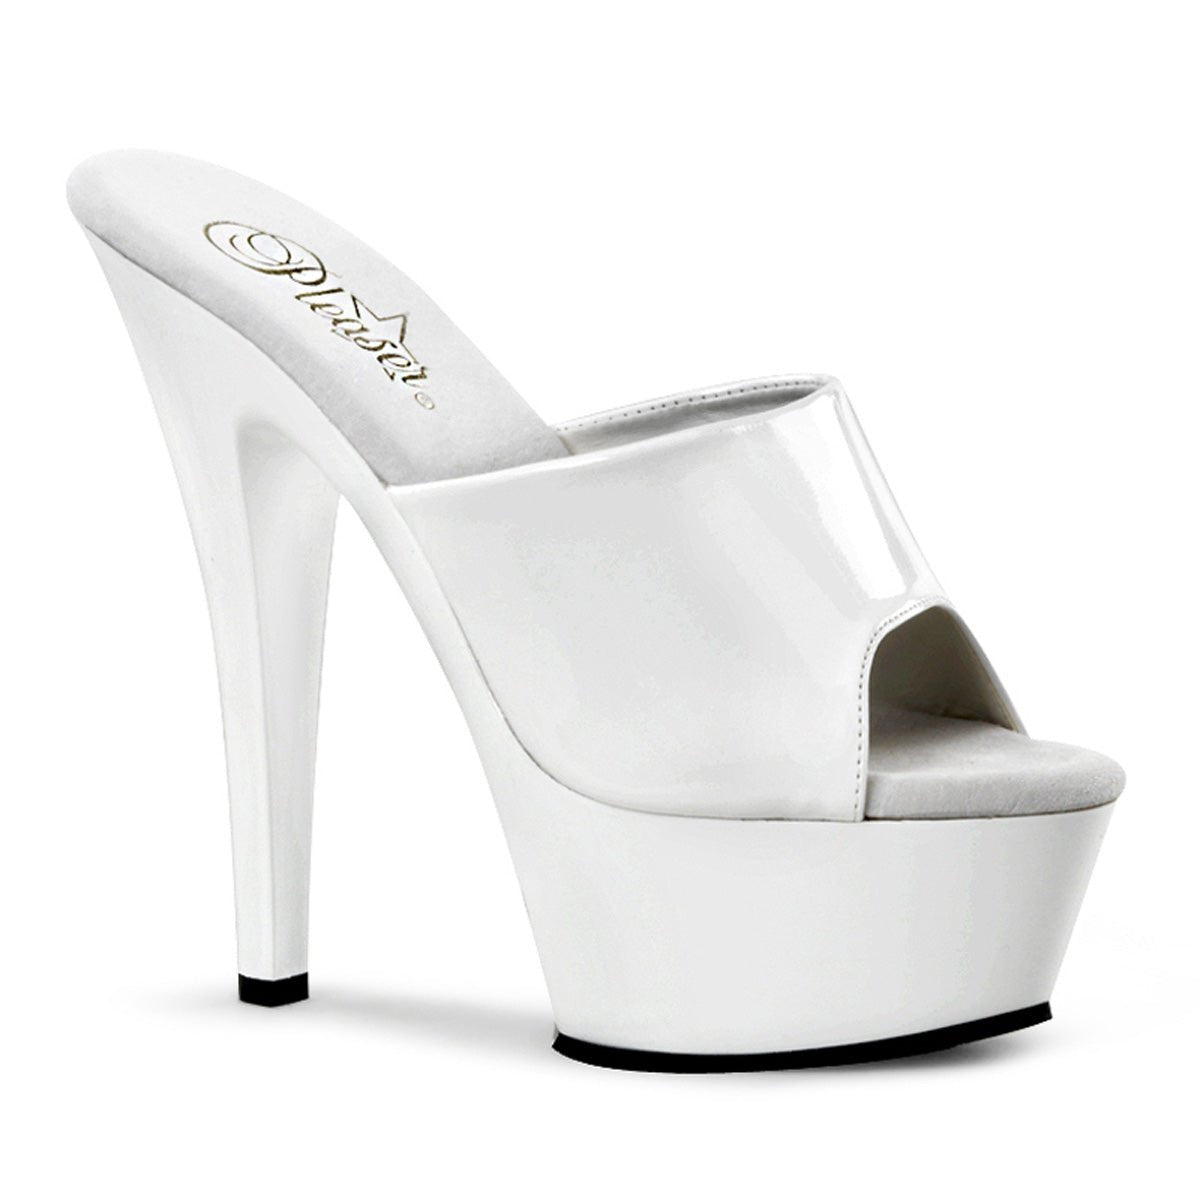 Pleaser Kiss 201 White - Model Express VancouverShoes